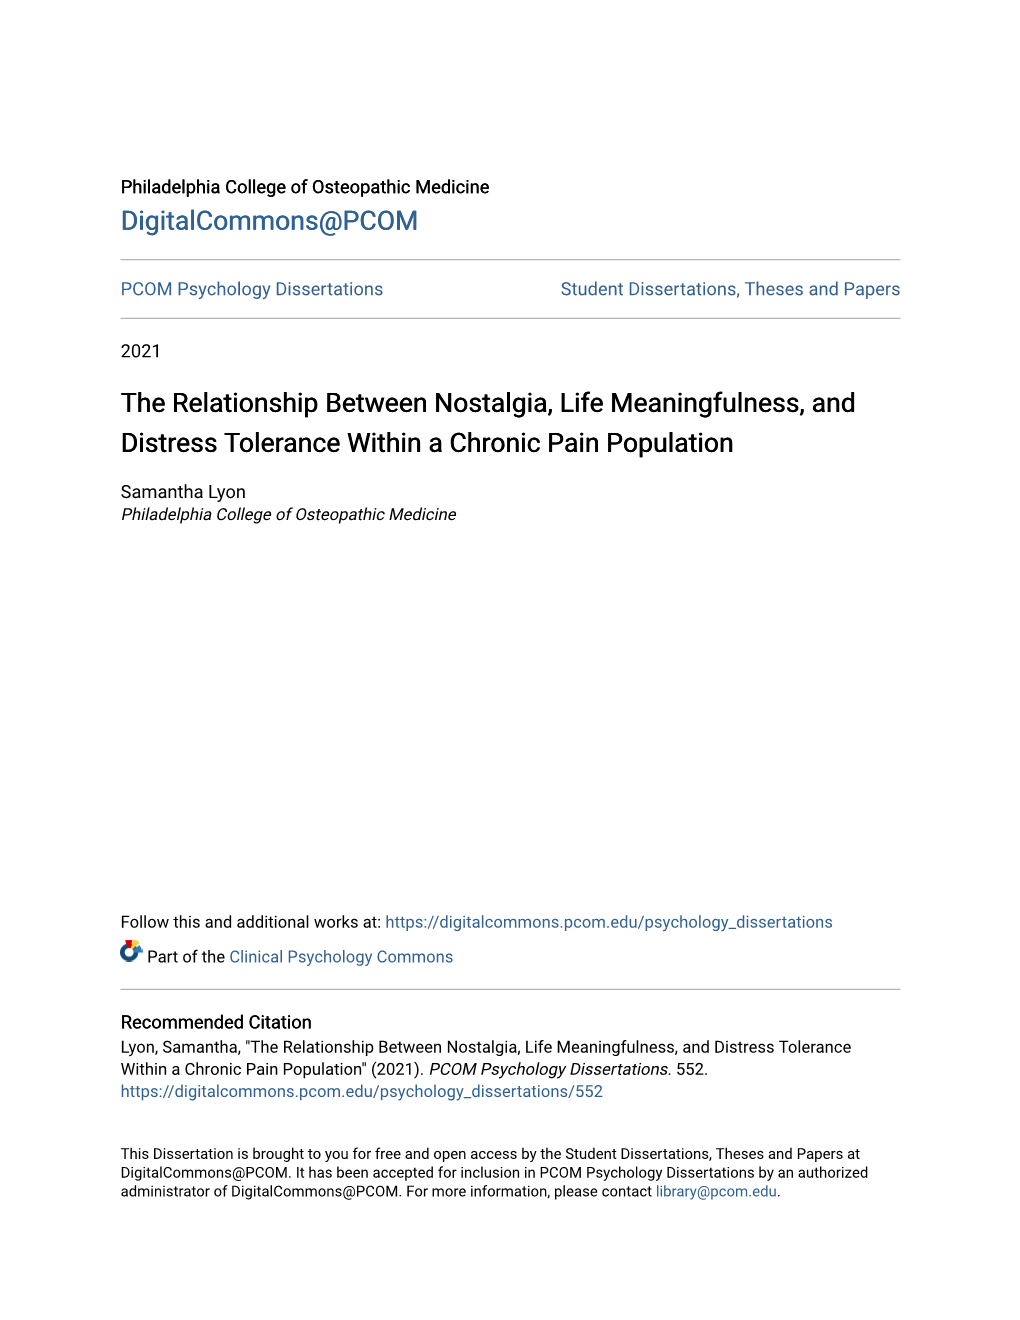 The Relationship Between Nostalgia, Life Meaningfulness, and Distress Tolerance Within a Chronic Pain Population